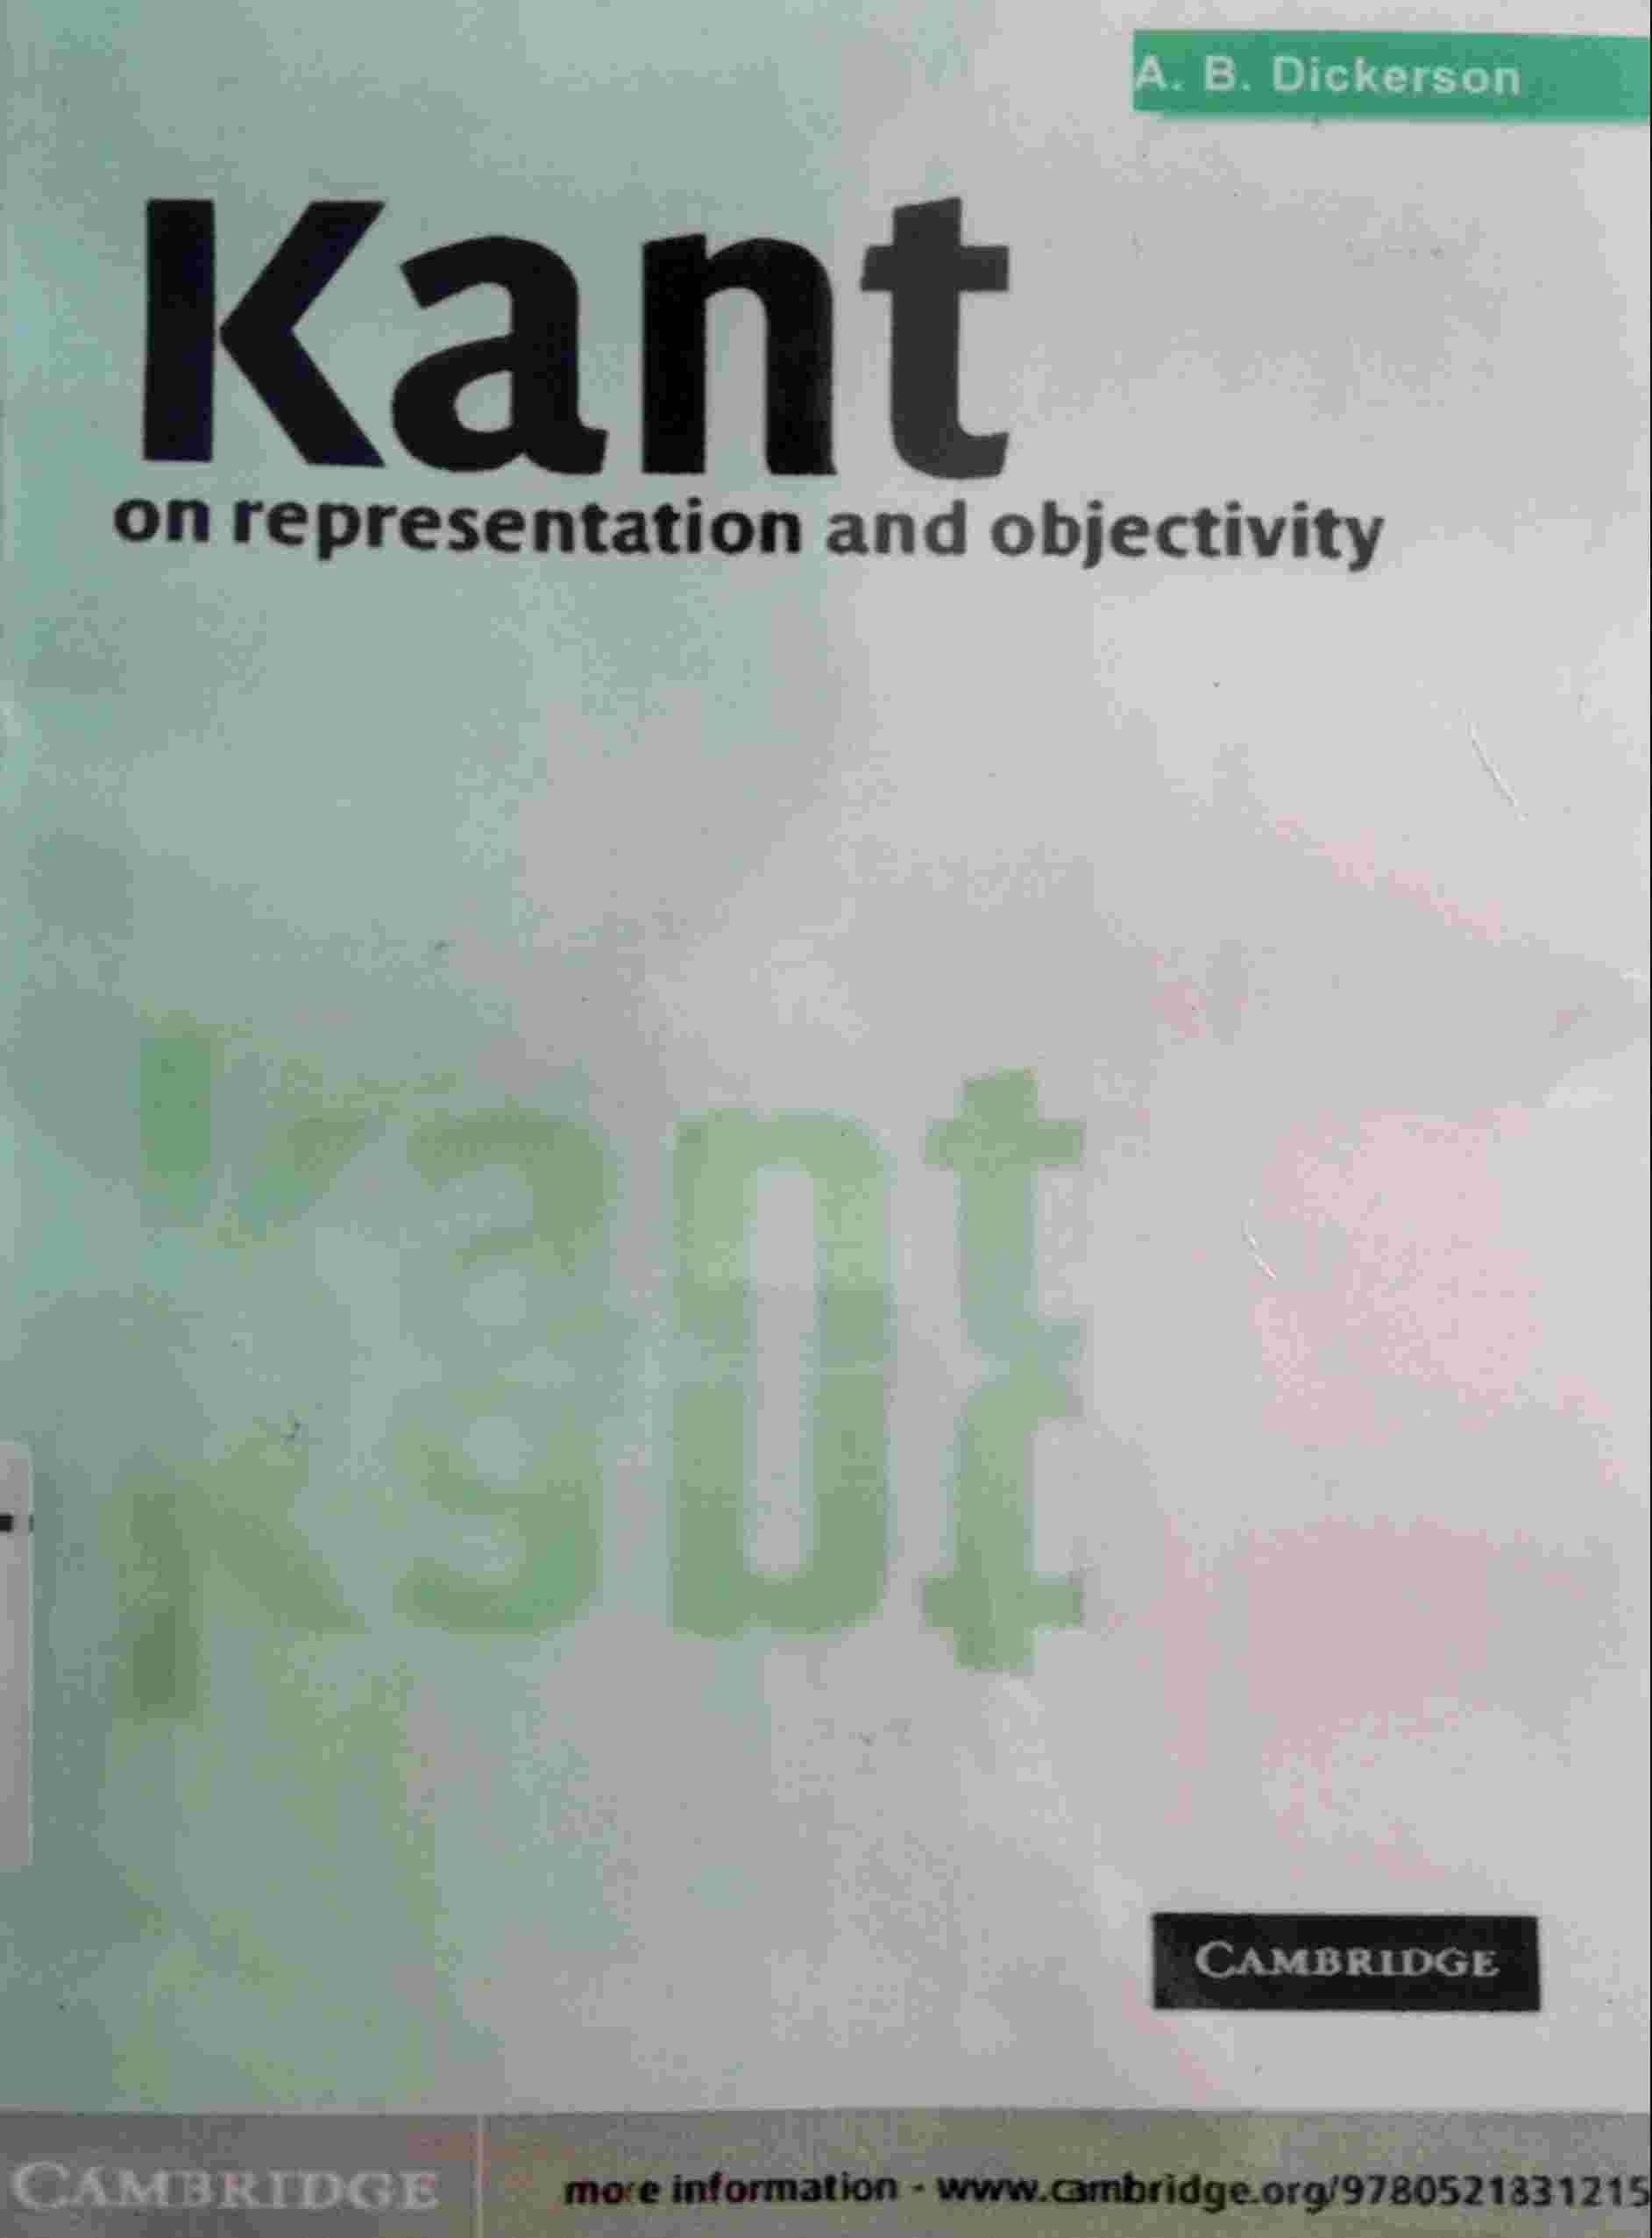 KANT ON REPRESENTATION AND OBJECTIVITY